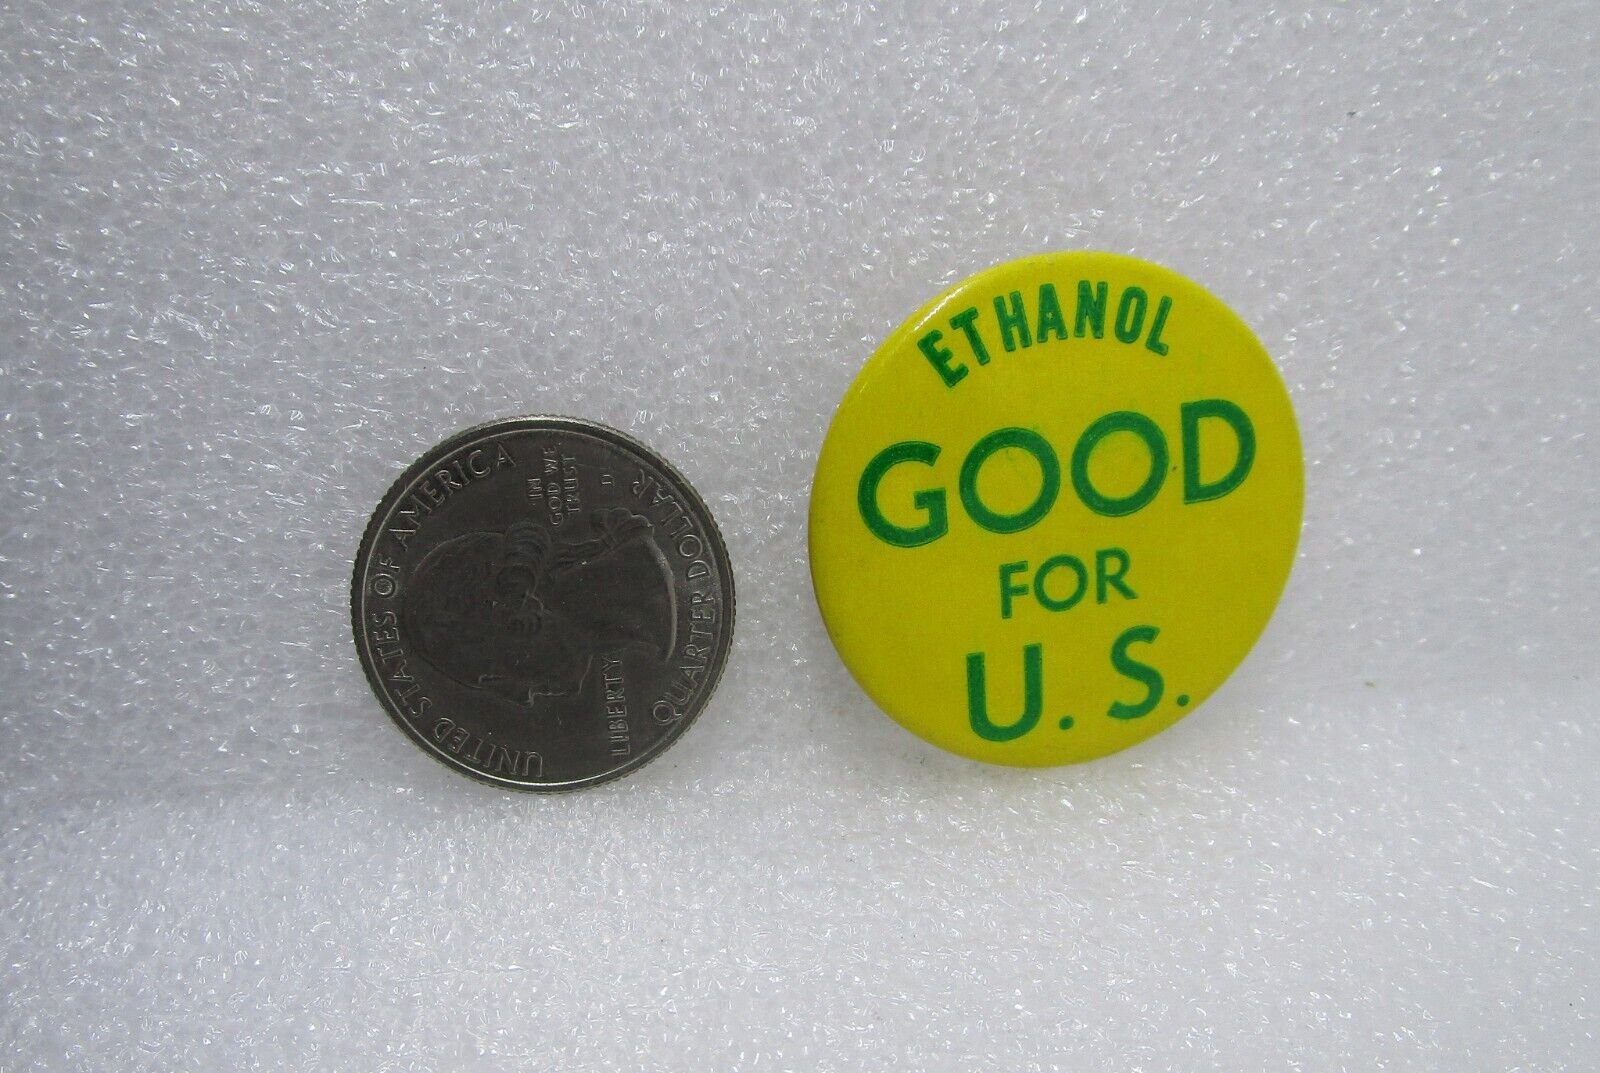 Ethanol Good For U.S. Button Pin